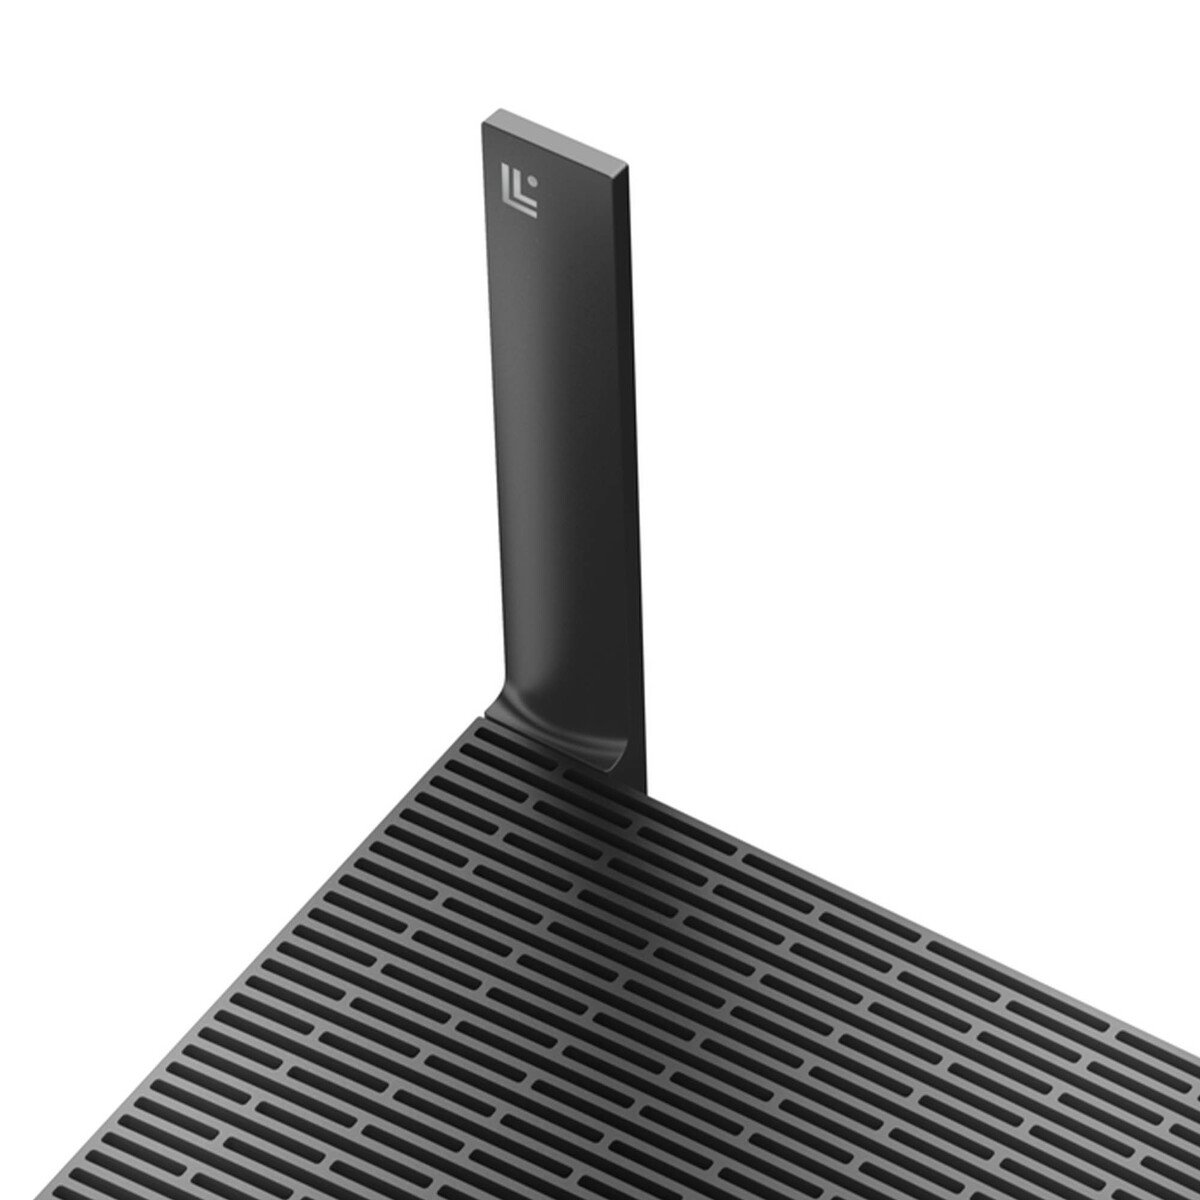 Linksys AX3000 Dual-Band WiFi 6 Mesh Router MR2000-ME